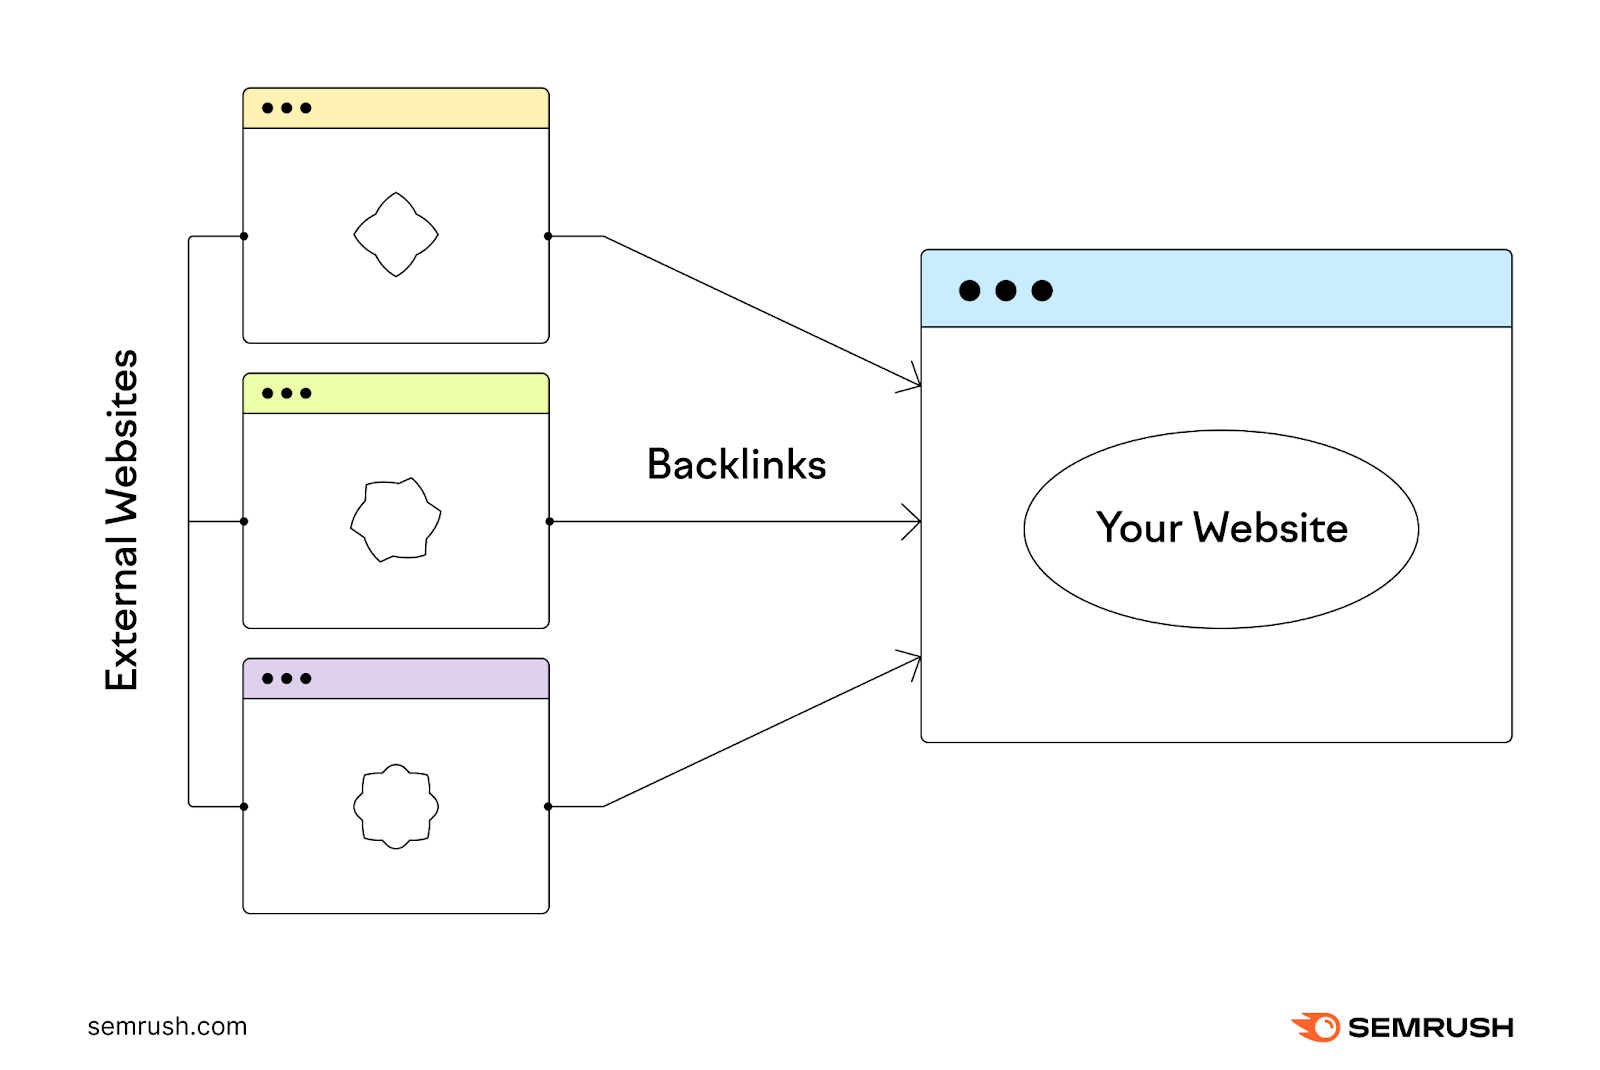 Arrows representing backlinks constituent   from “external websites” to “your website”